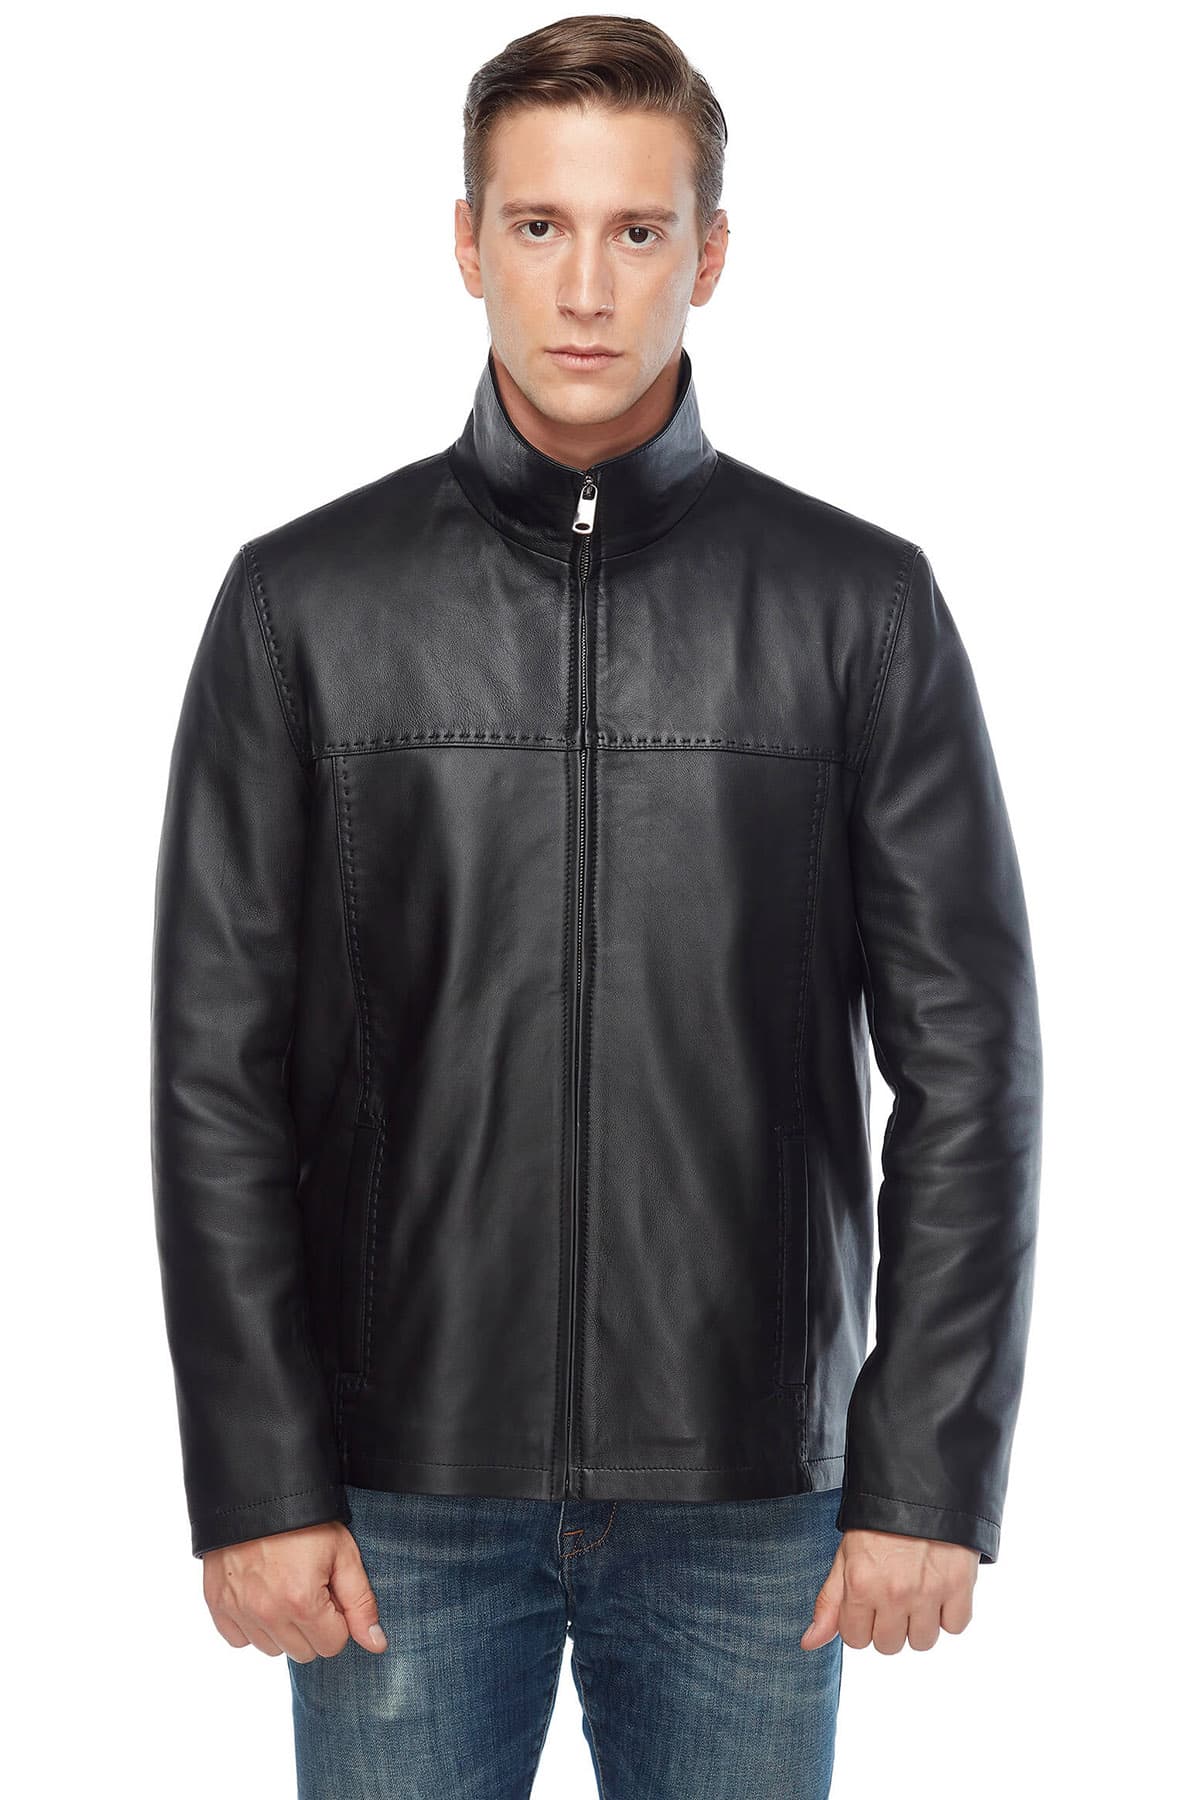 You've Searched for Mens Black Genuine Leather Jacket